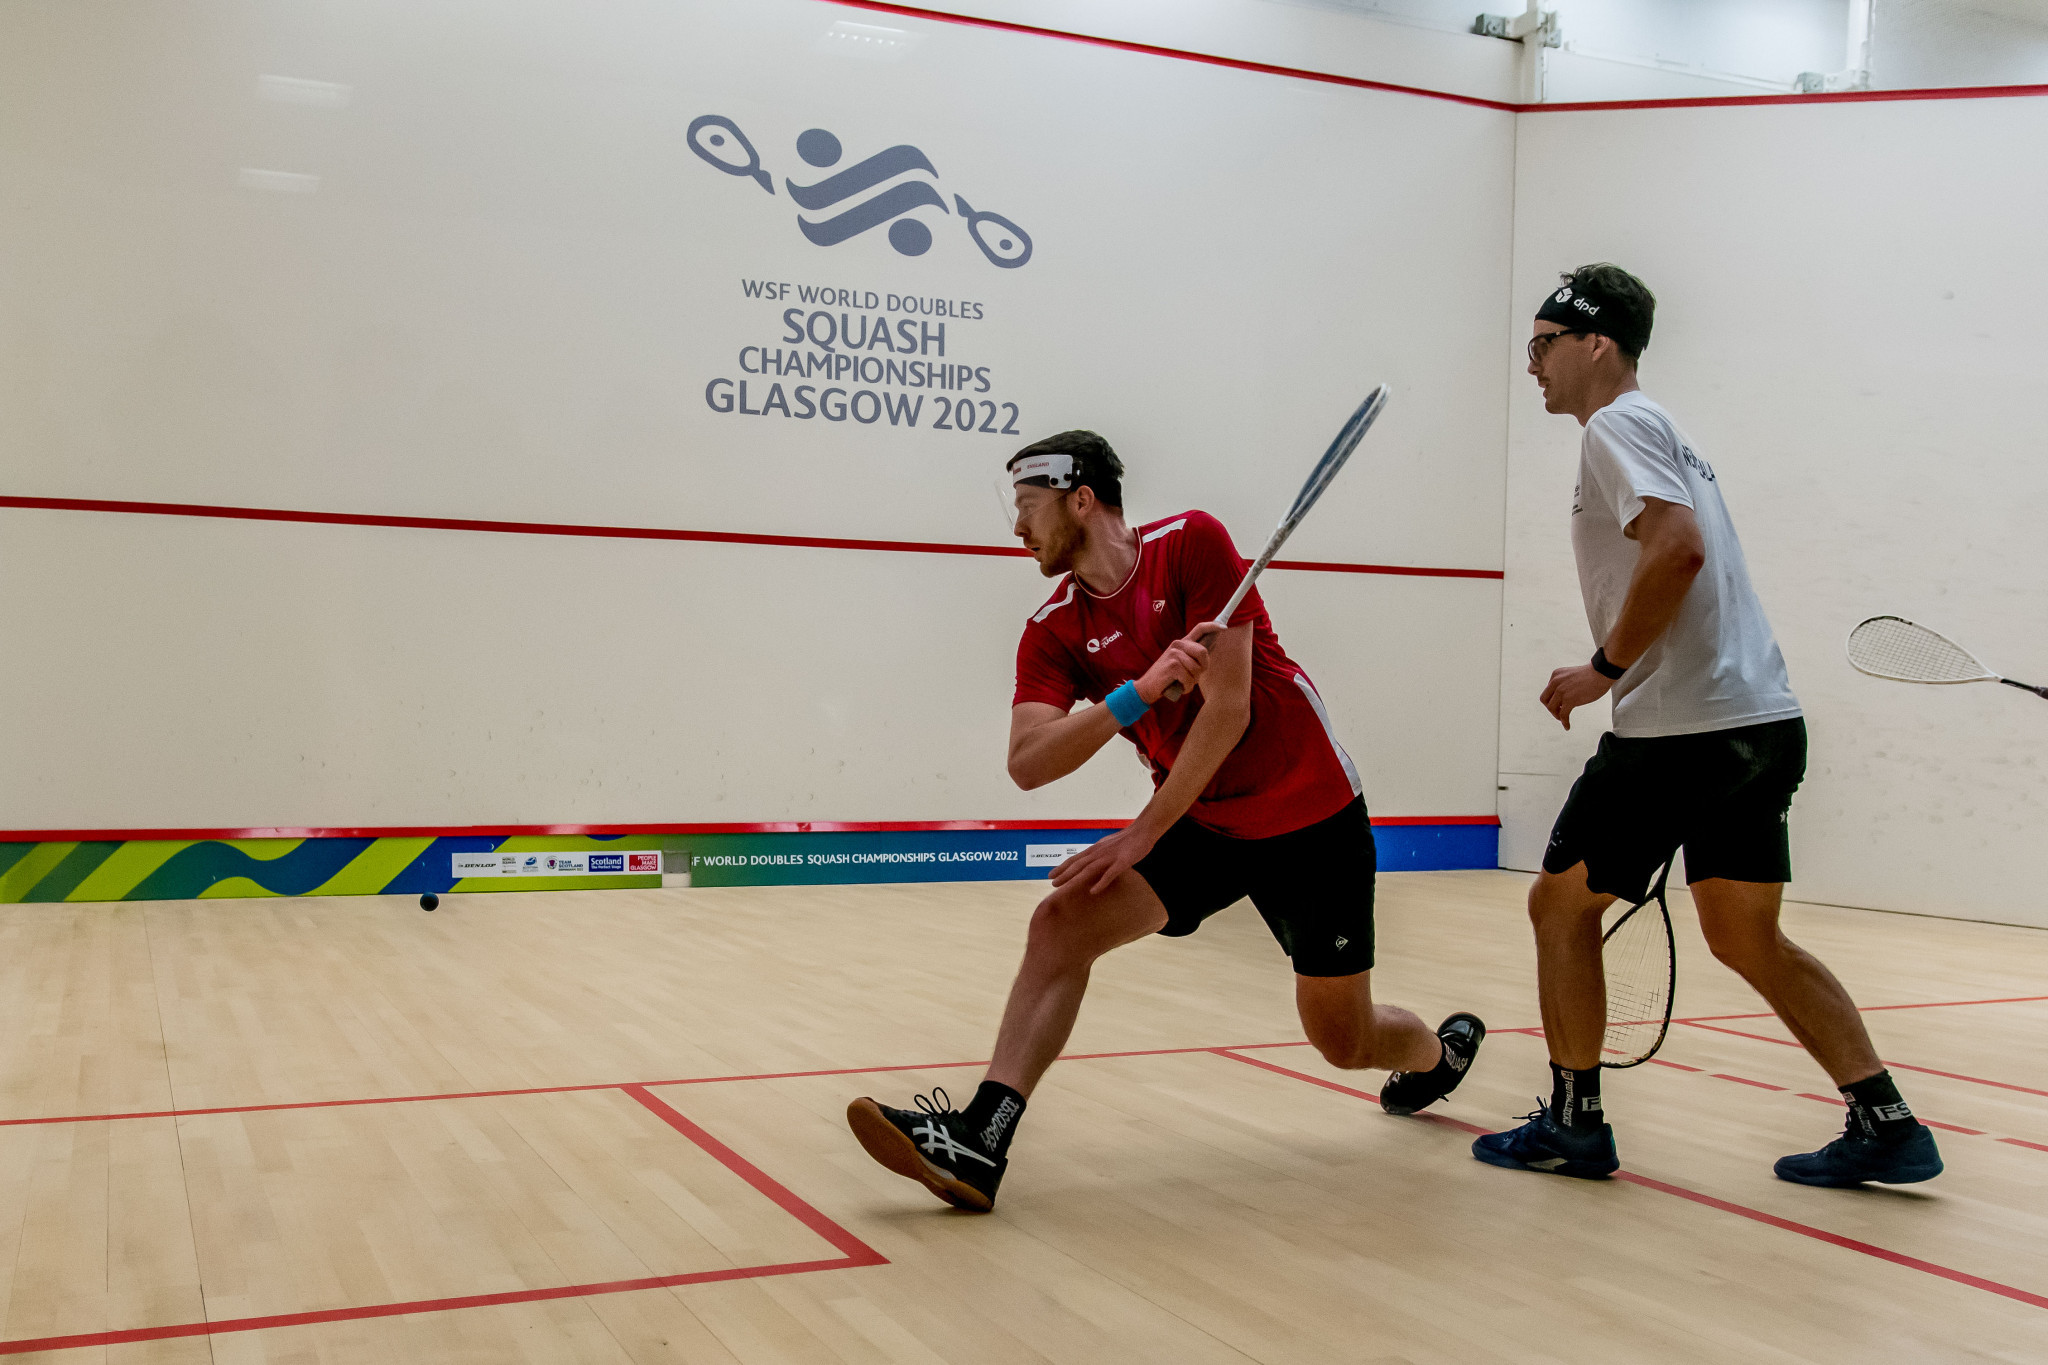 Mixed draw top seeds King and Coll beaten as group play continues at World Doubles Squash Championships